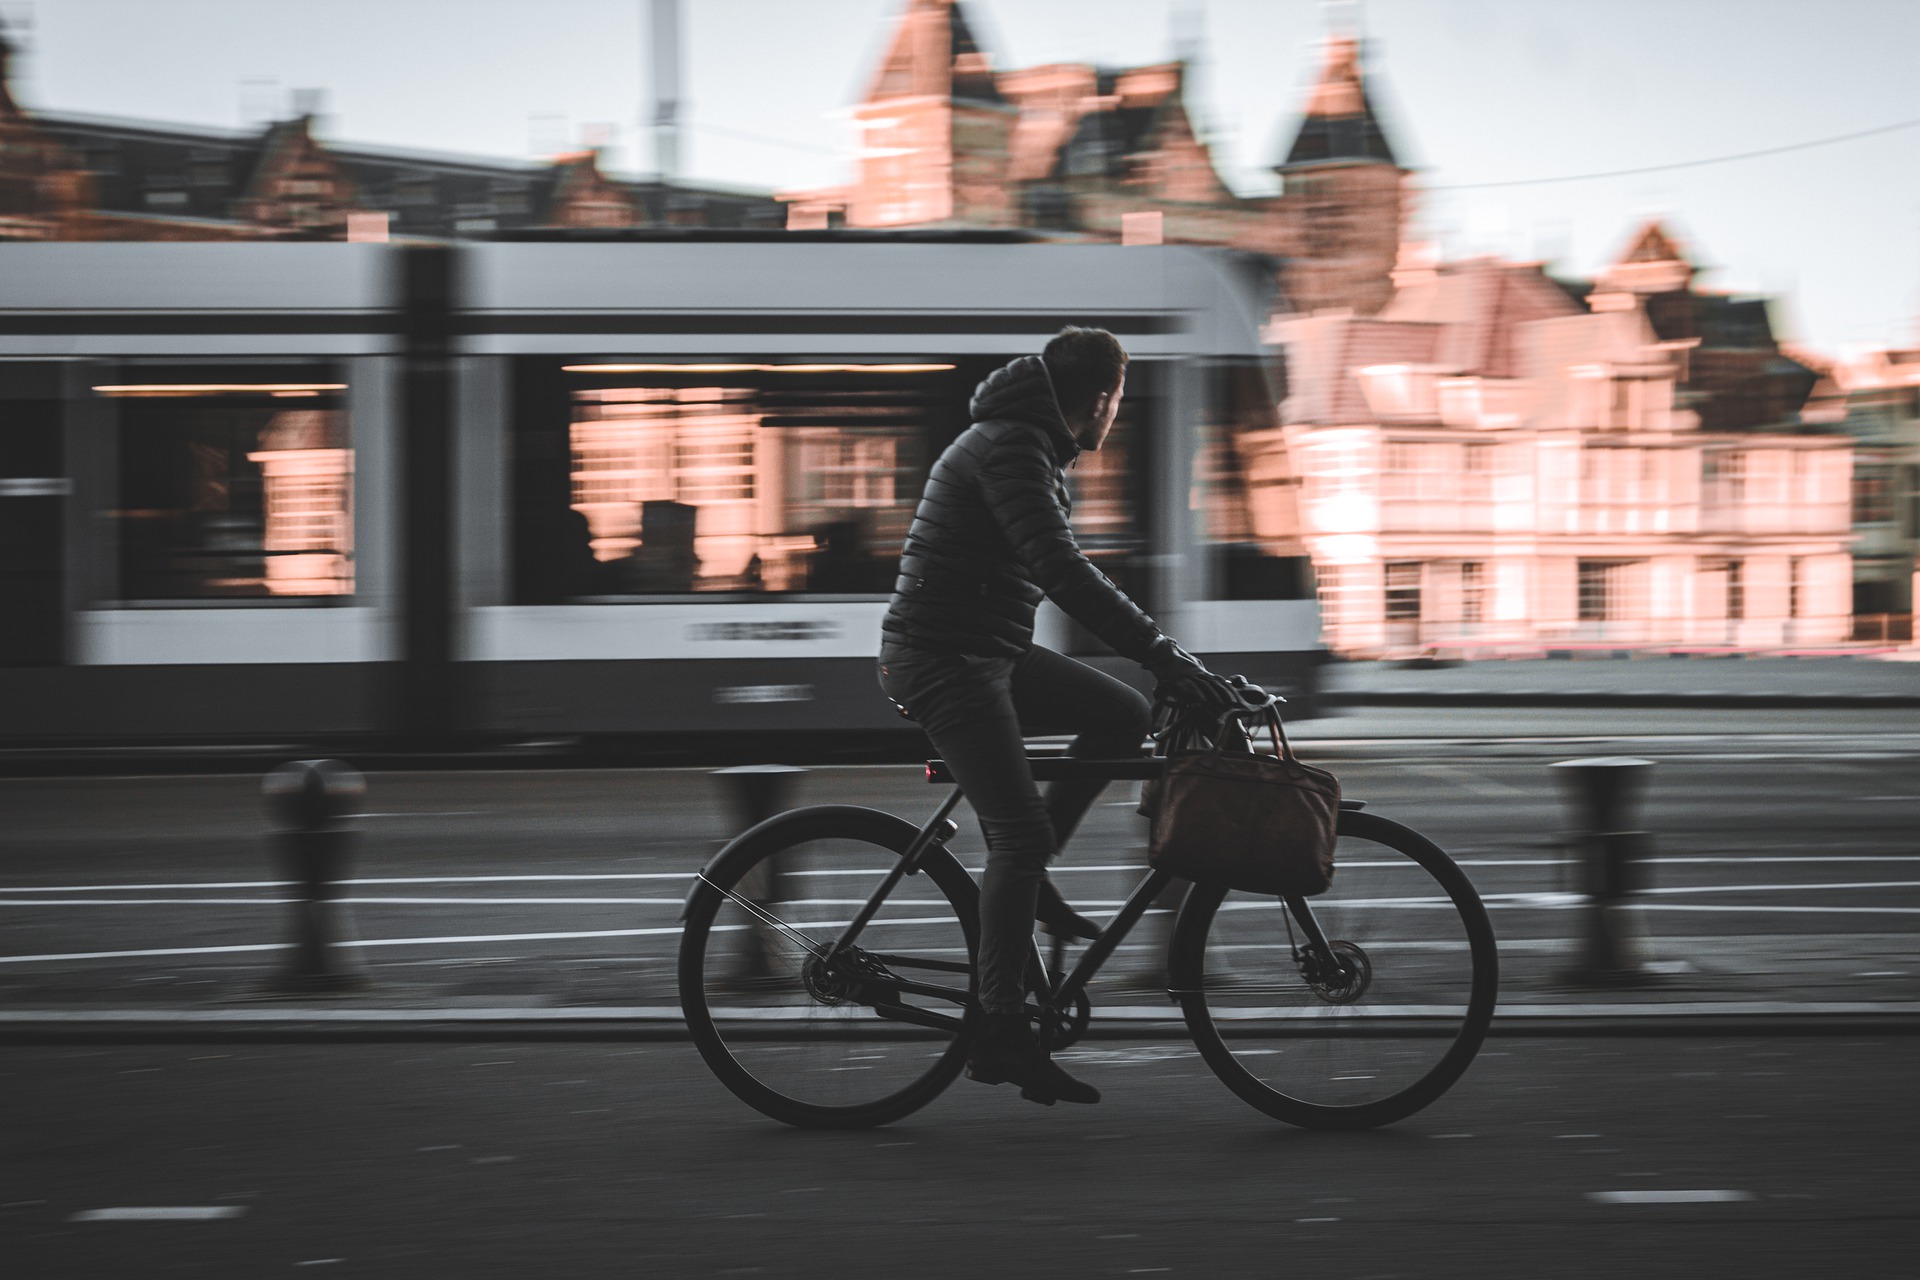 Cycling to work can cut down on transportation costs which can help to save money